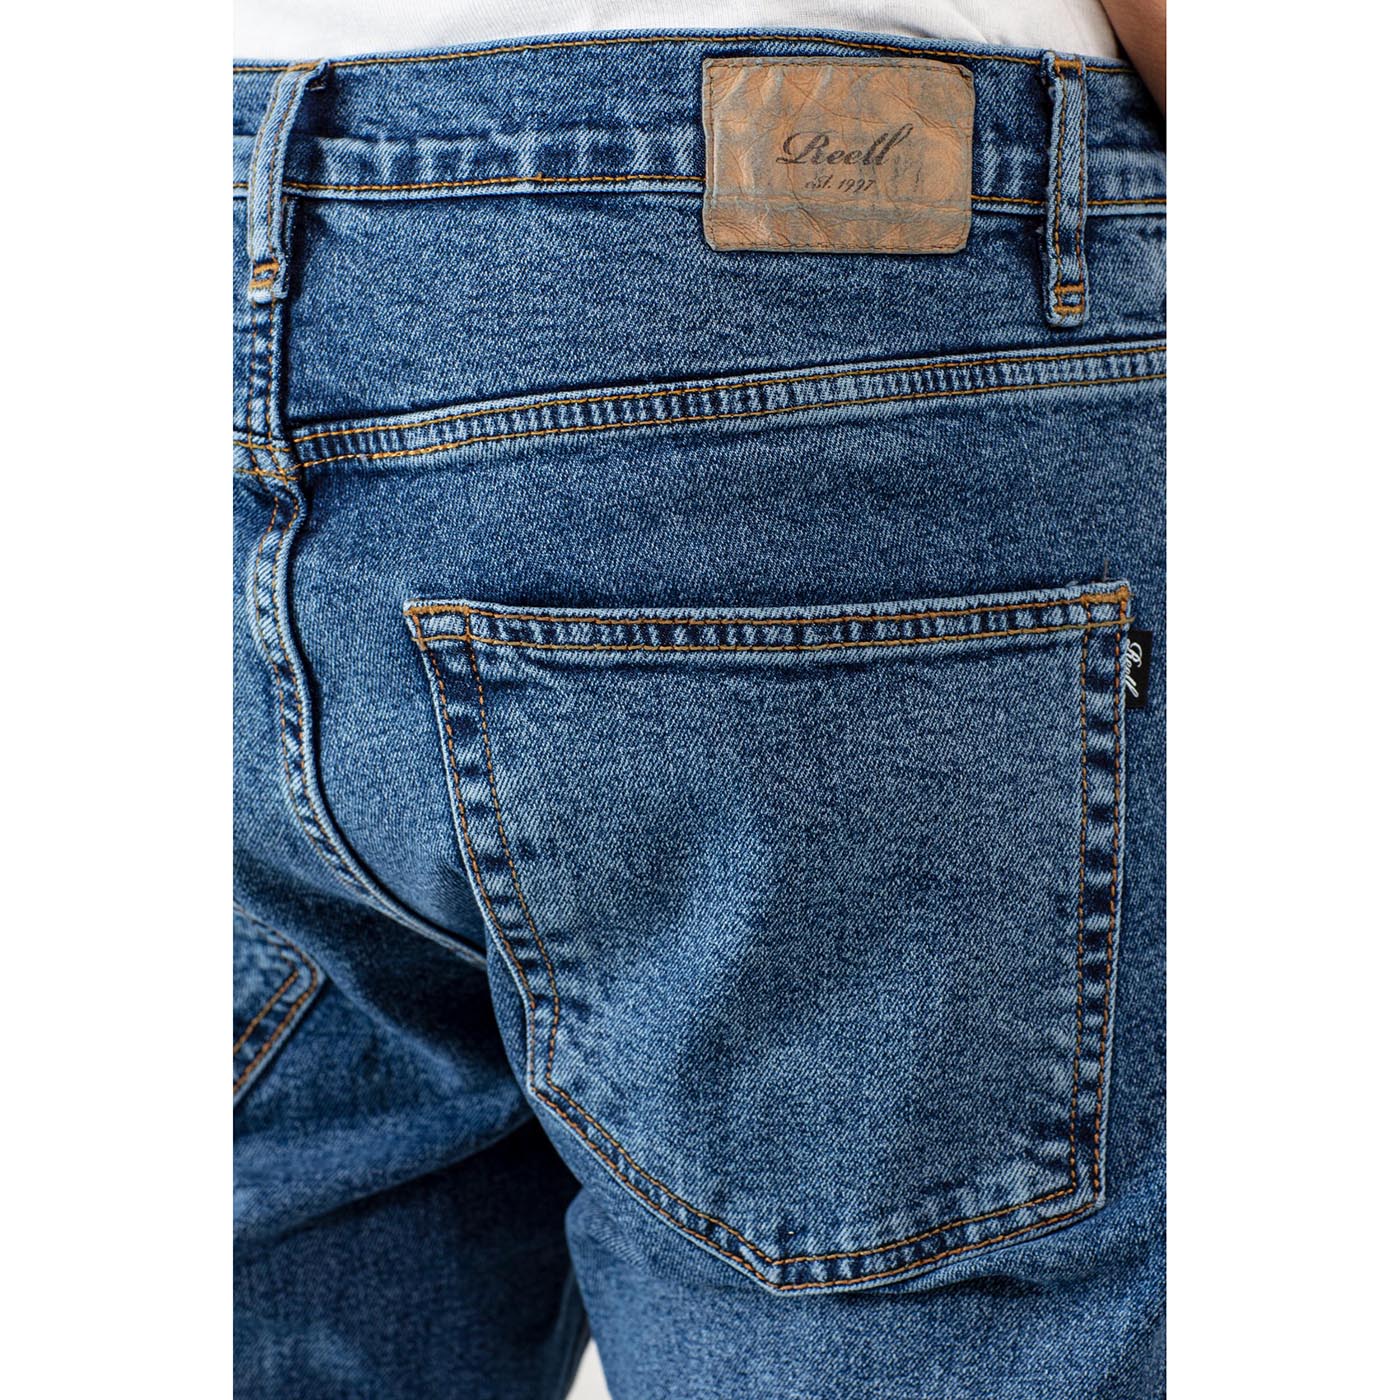 Reell Jeans Barfly Straight Fit Jeans Retro Mid Blue